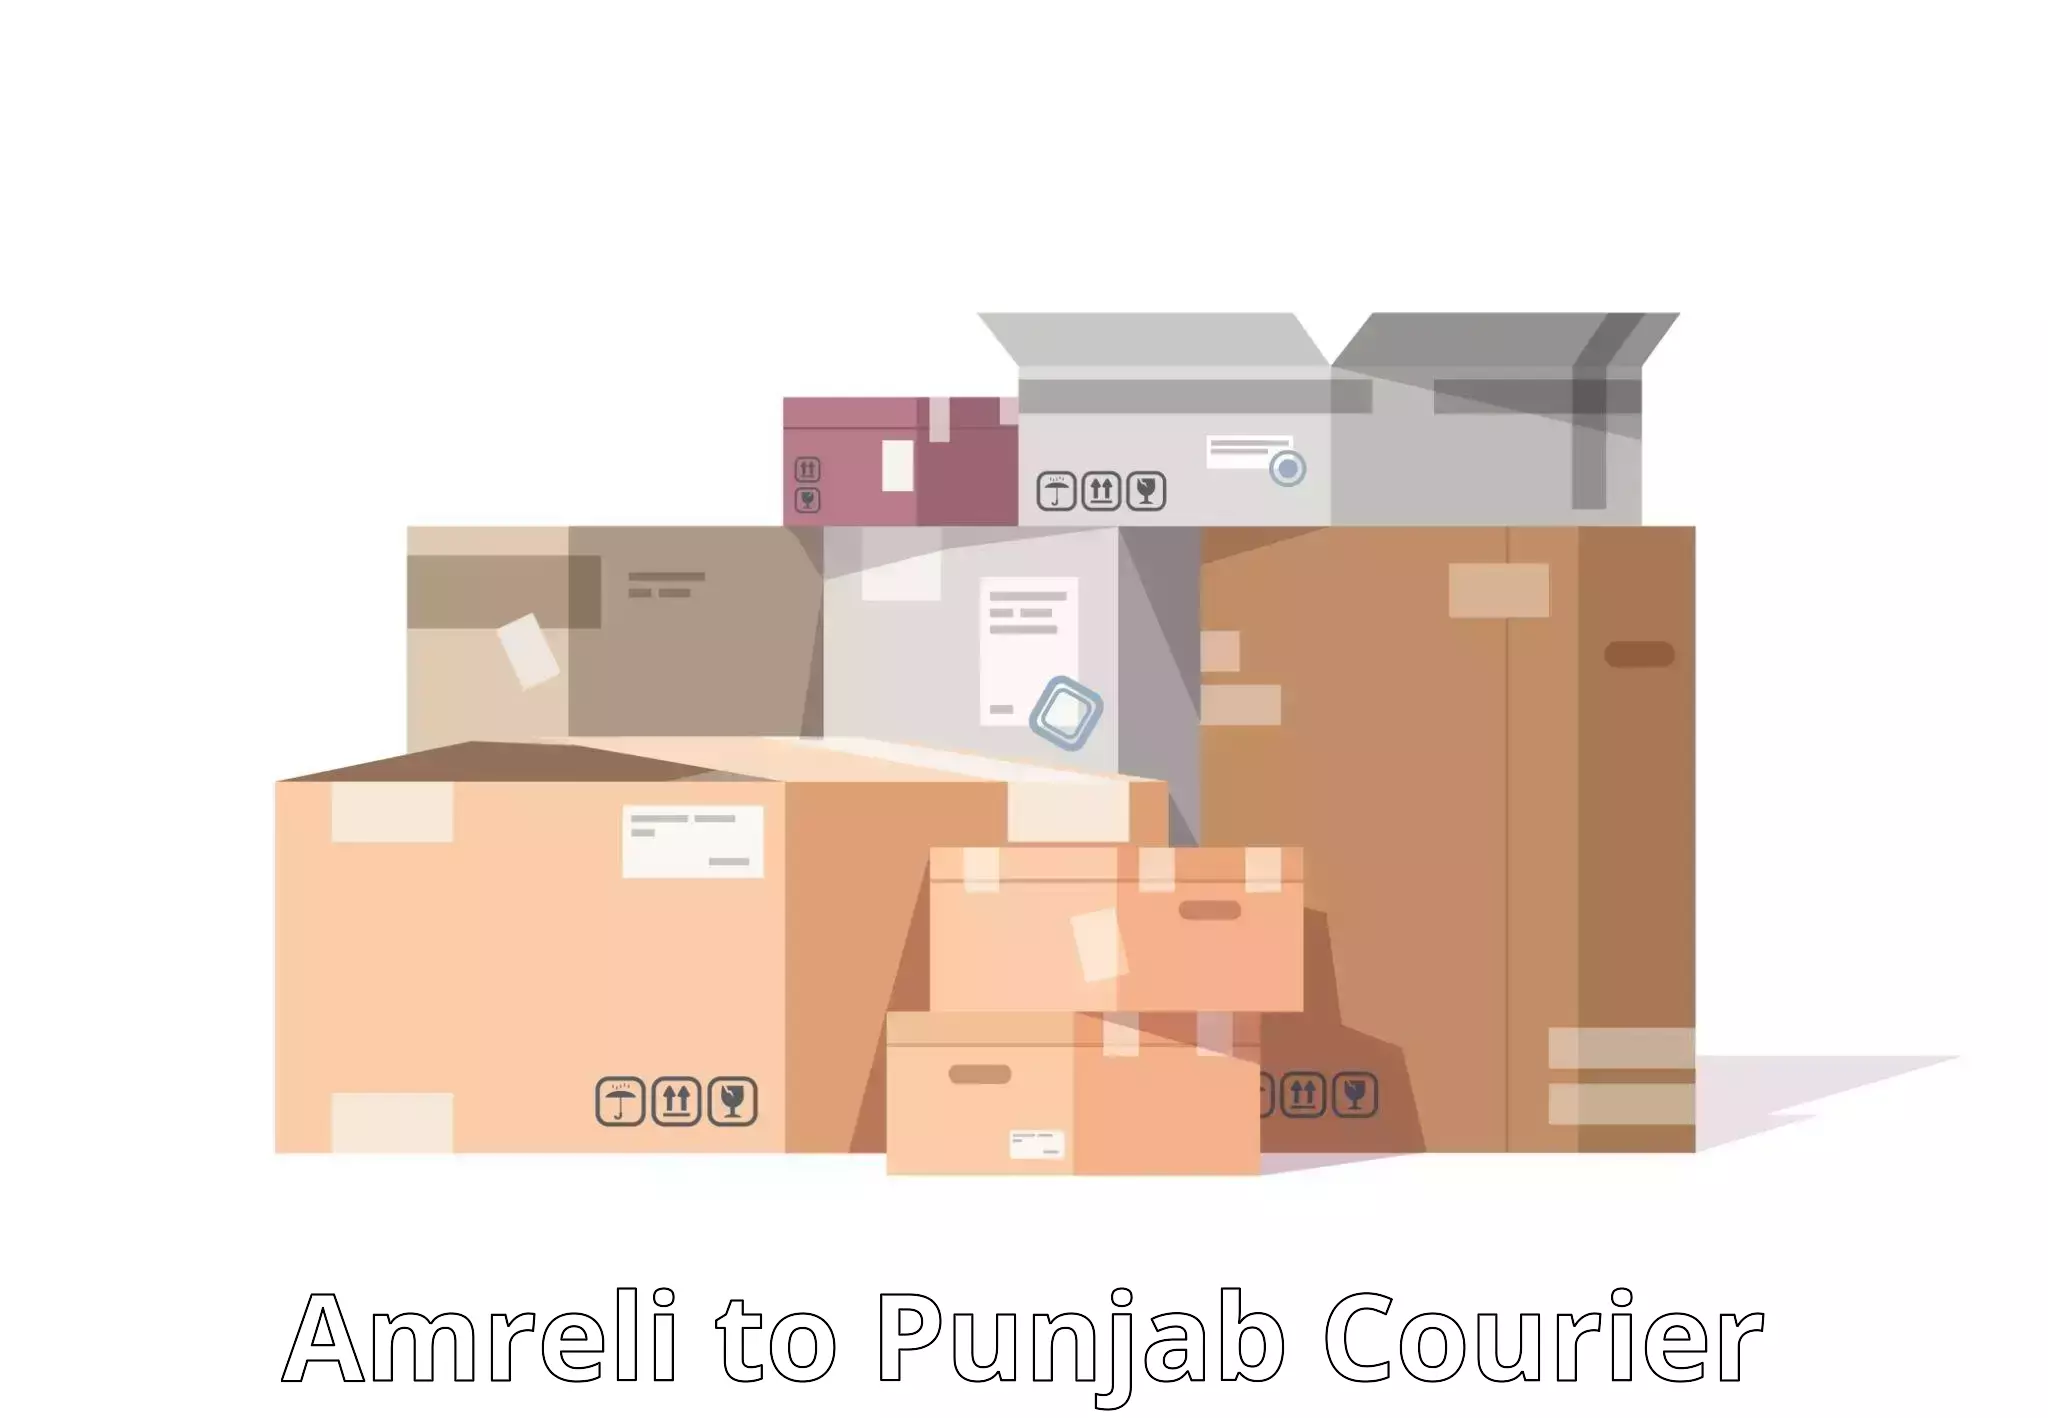 Enhanced delivery experience Amreli to Amritsar